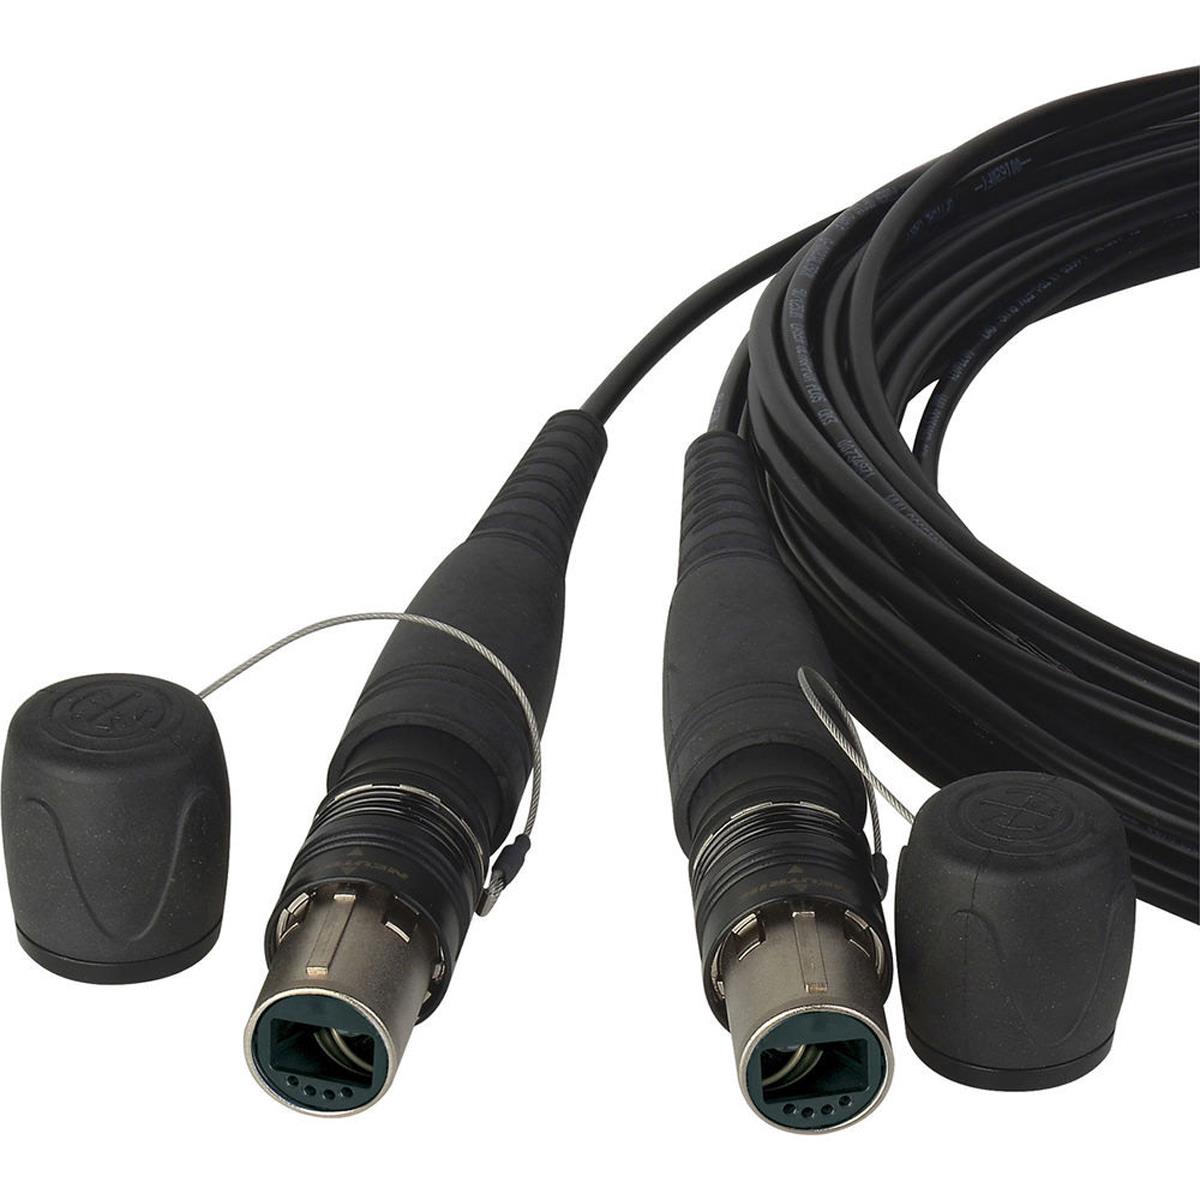 Image of Camplex 25' opticalCON DUO to DUO Multimode Fiber Optic Tactical Snake Cable